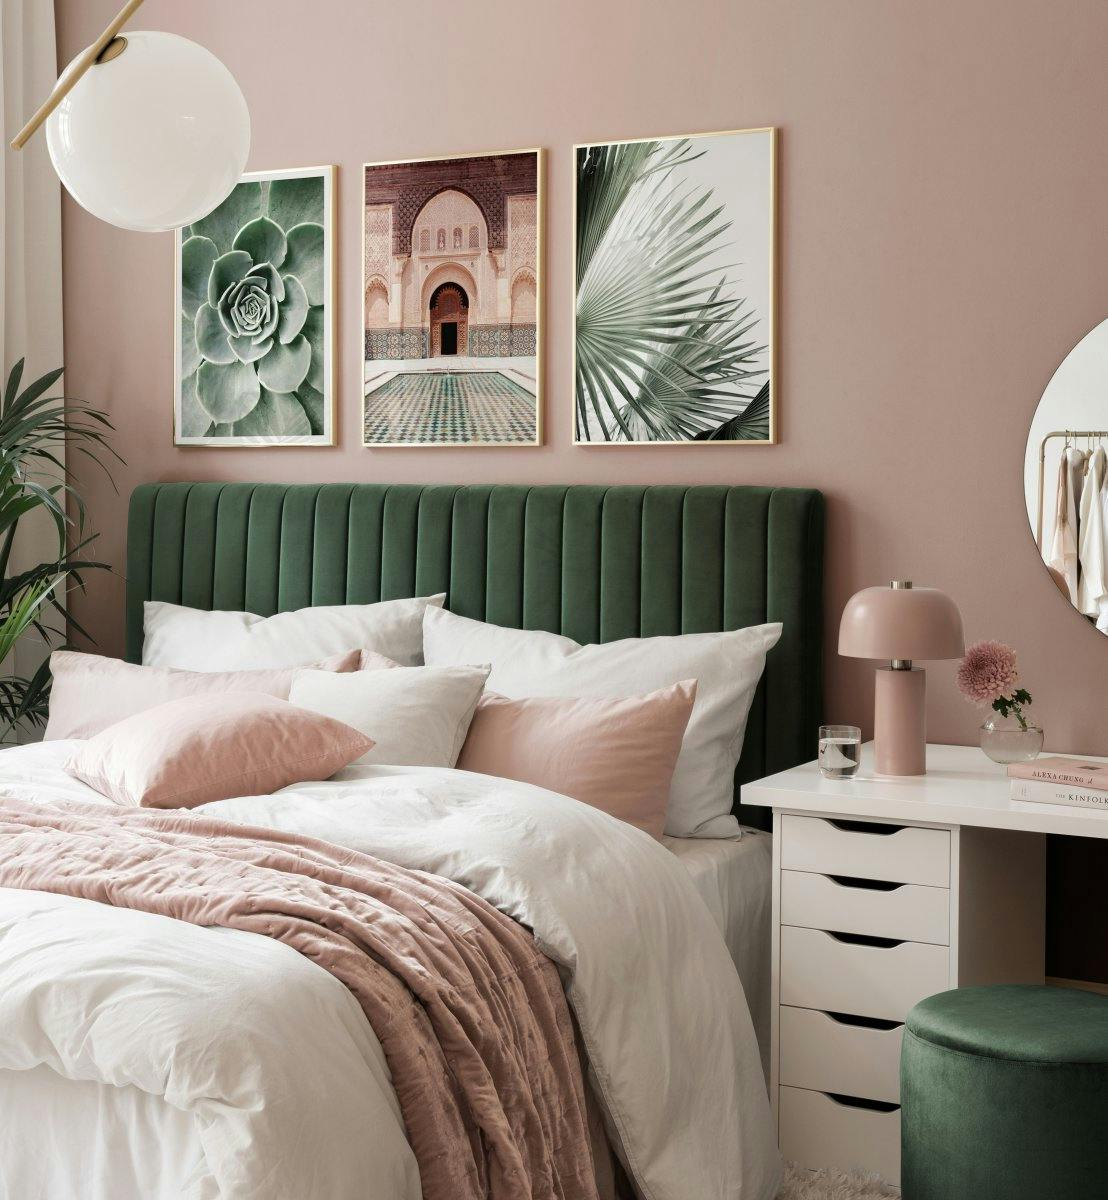 Photographs of leaves and architecture in green and beige for bedroom